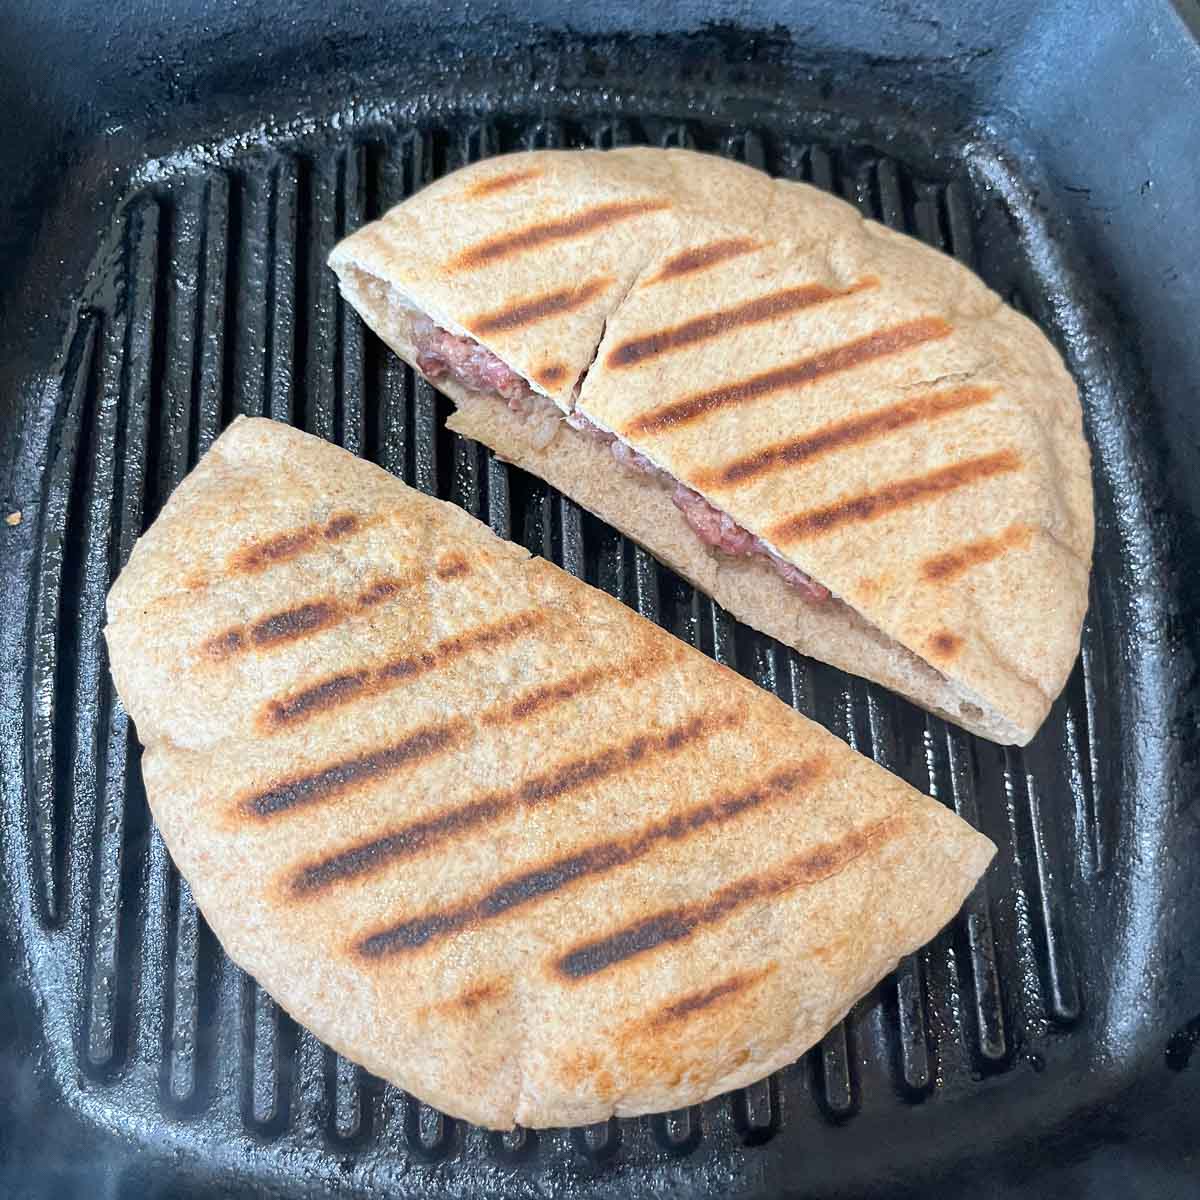 Arayes in a grill pan